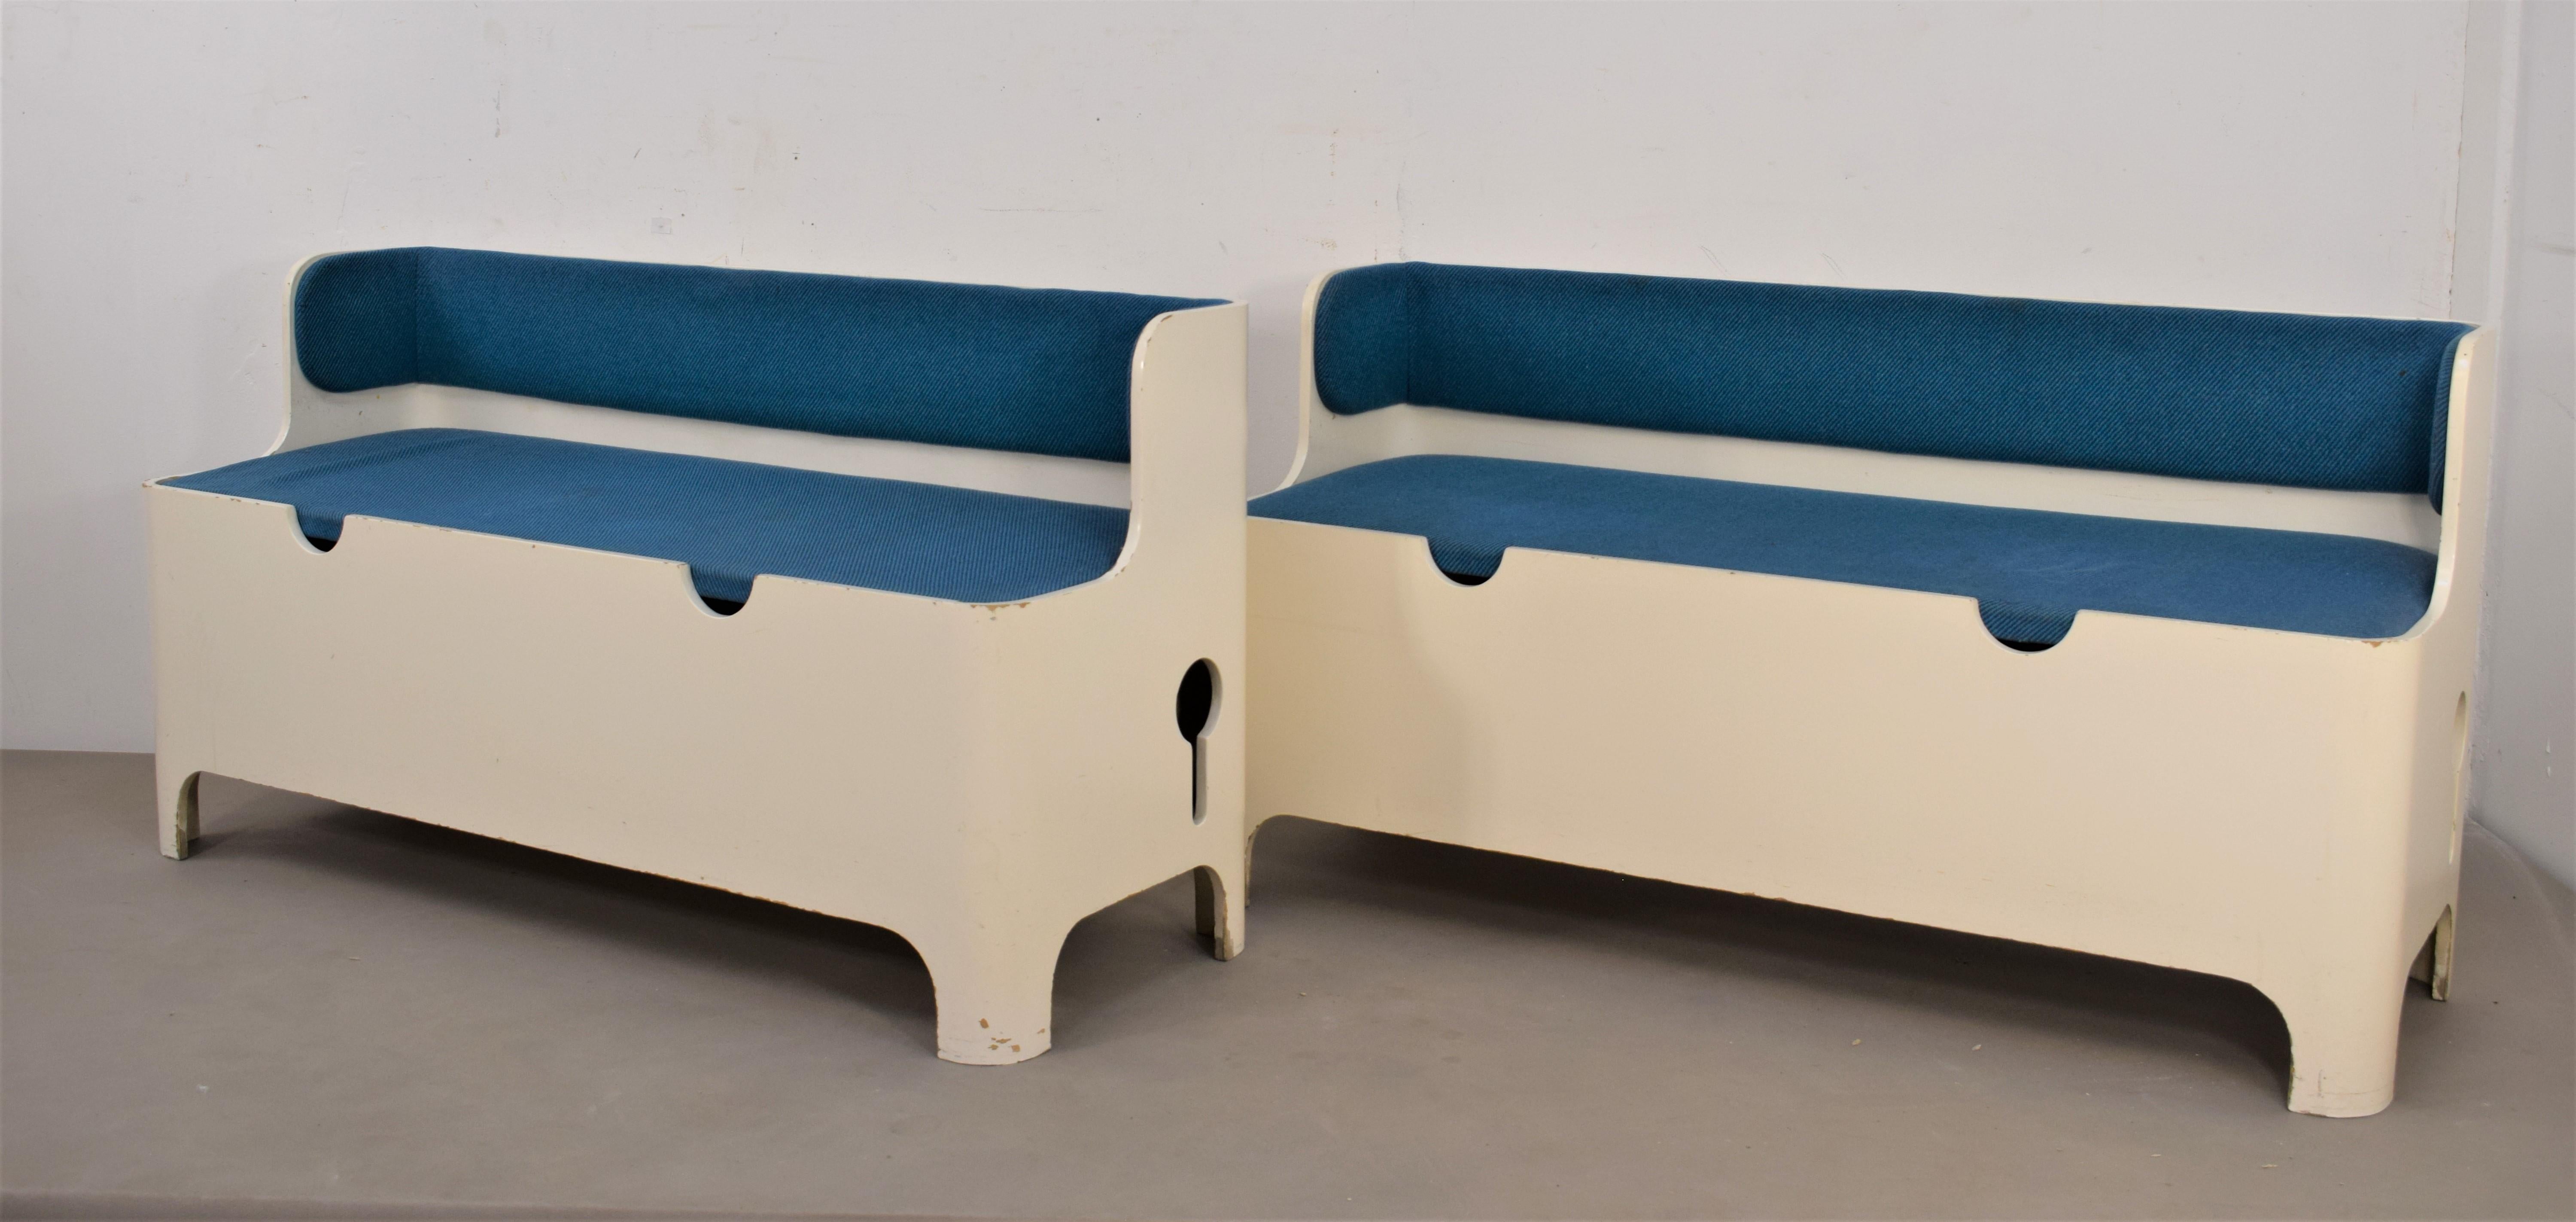 Carlo De Carli for Fiarm, pair of benches, 1960s.
Dimensions: H=60 cm; W=111 cm; D=41 cm; Height seat = 38 cm.